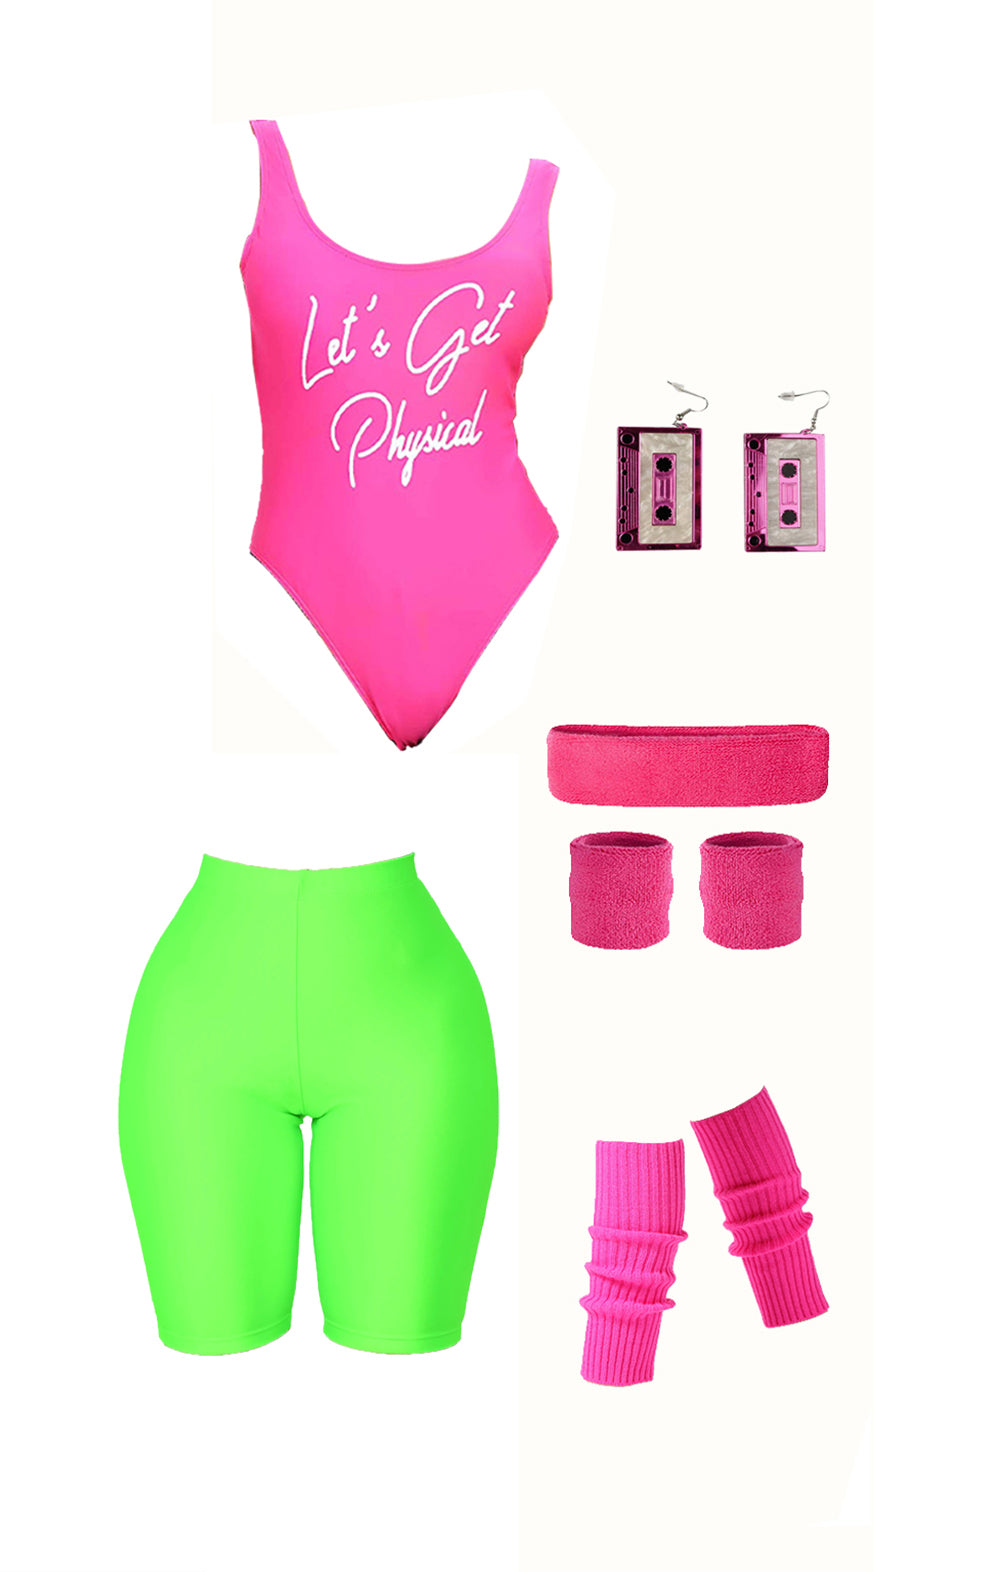 Refreedom Womens 80s Workout Costume Outfit 80s Accessories Set Neon S –  refreedom